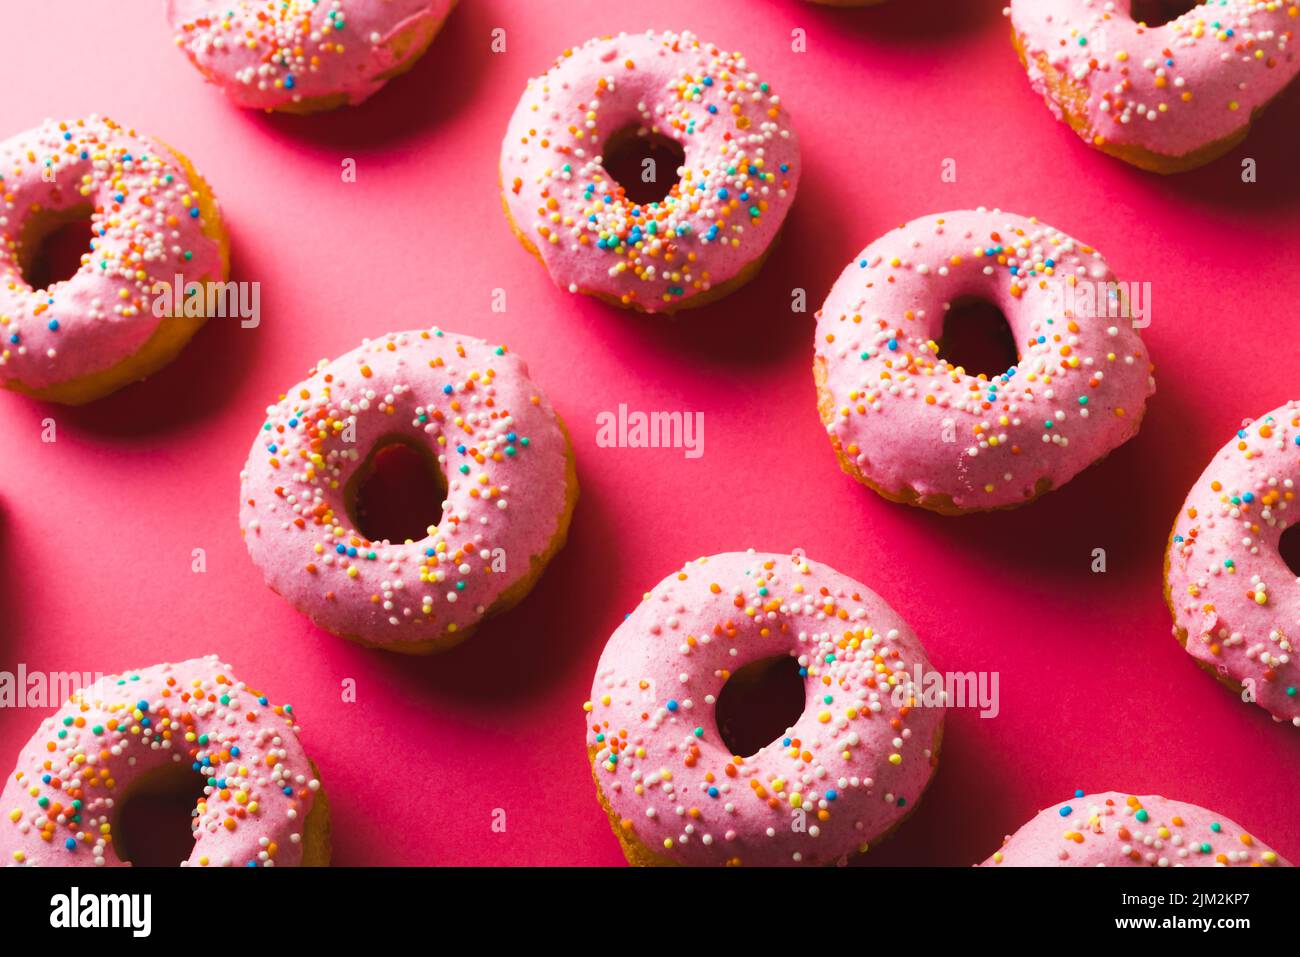 High angle view of fresh pink donuts with sprinklers against colored background Stock Photo